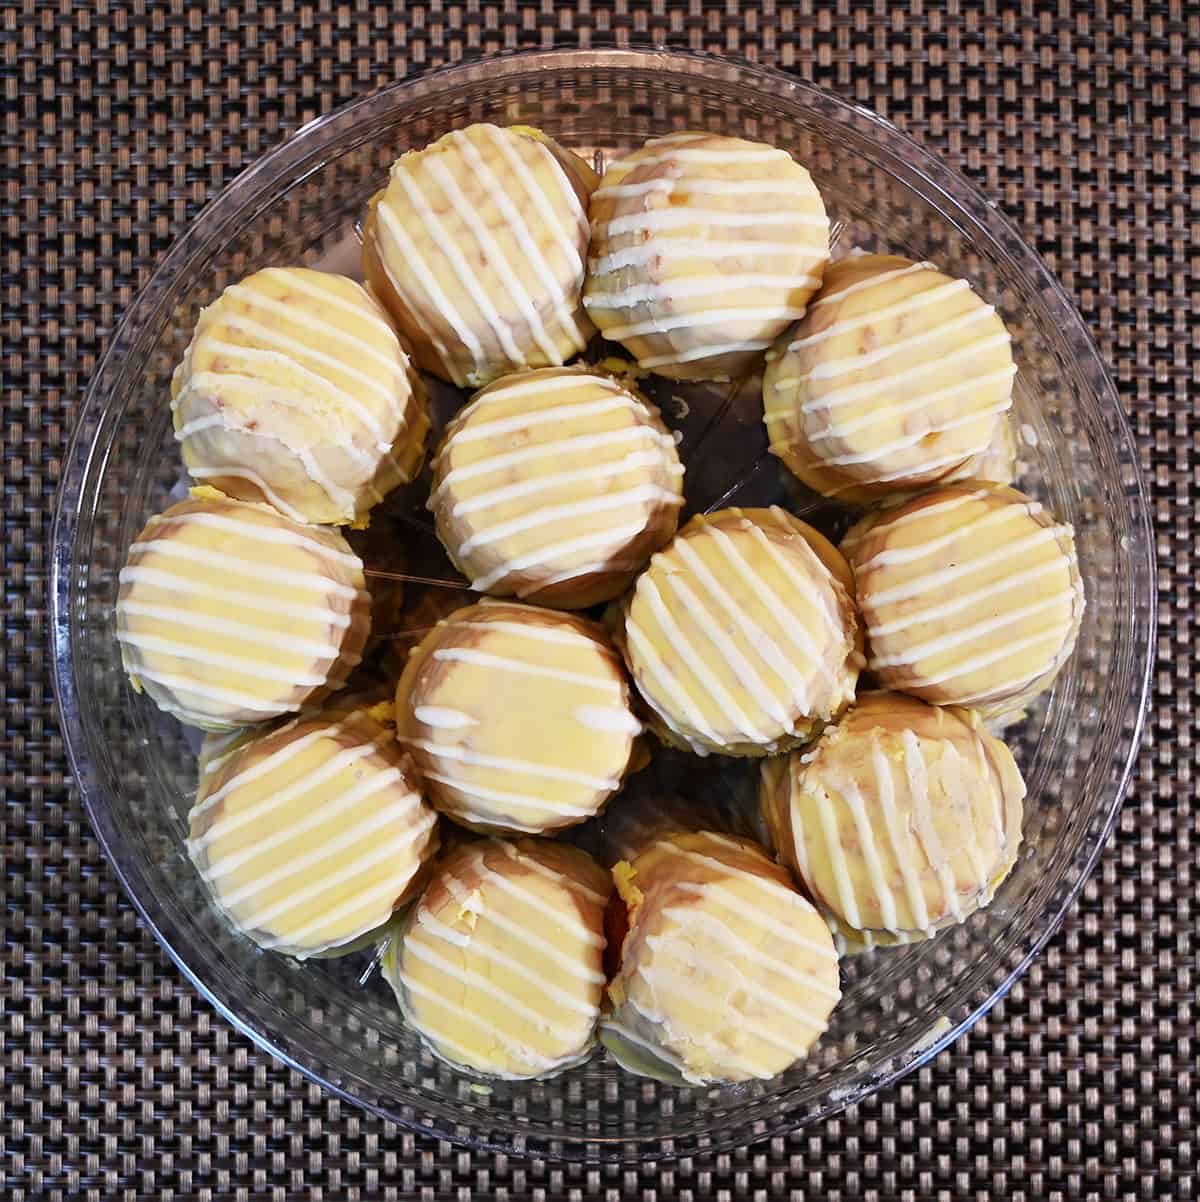 Top down image of the open container of lemon bites showing all the bites.